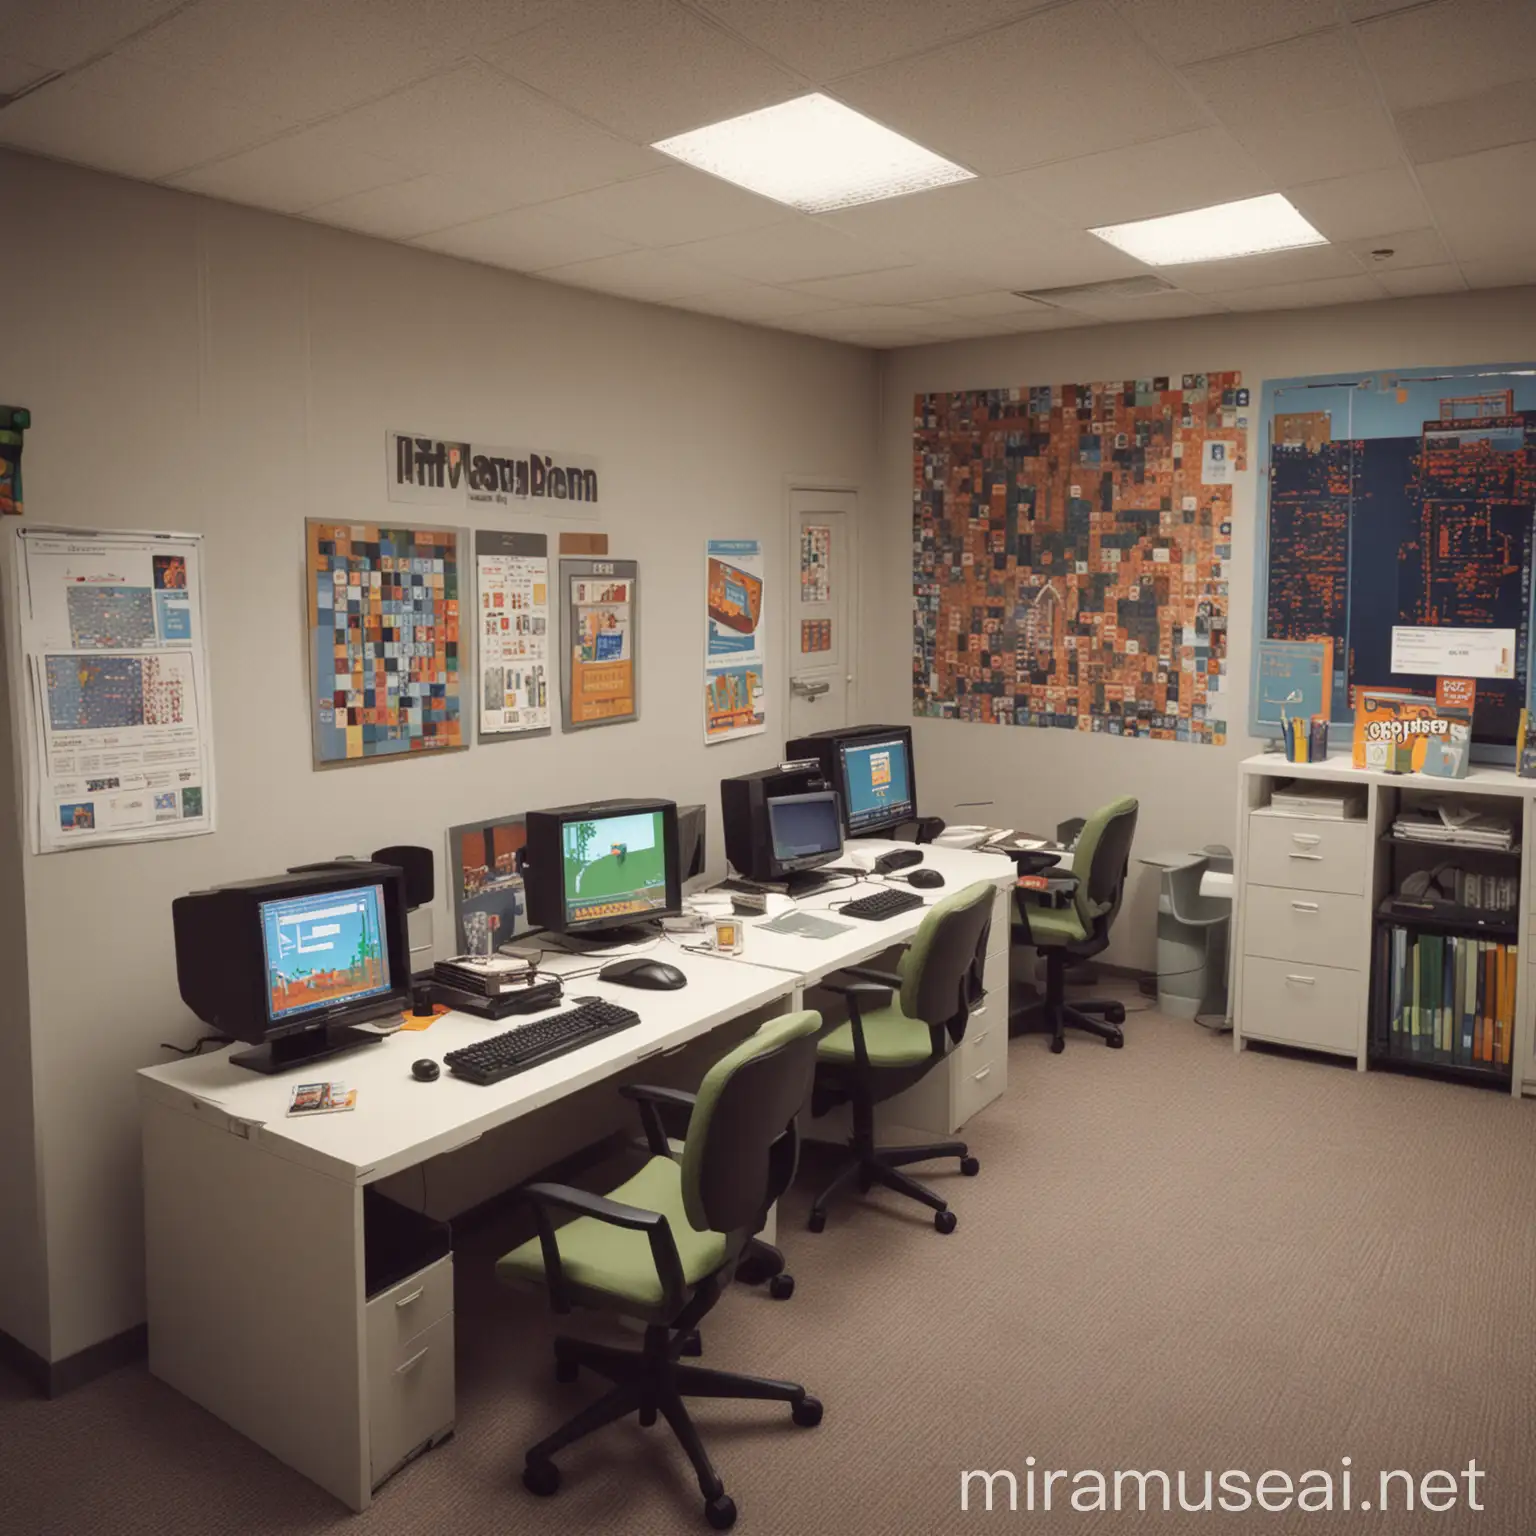 office using bitmap graphics and 256 colors in the style of click-and-point adventure games of the 90s
